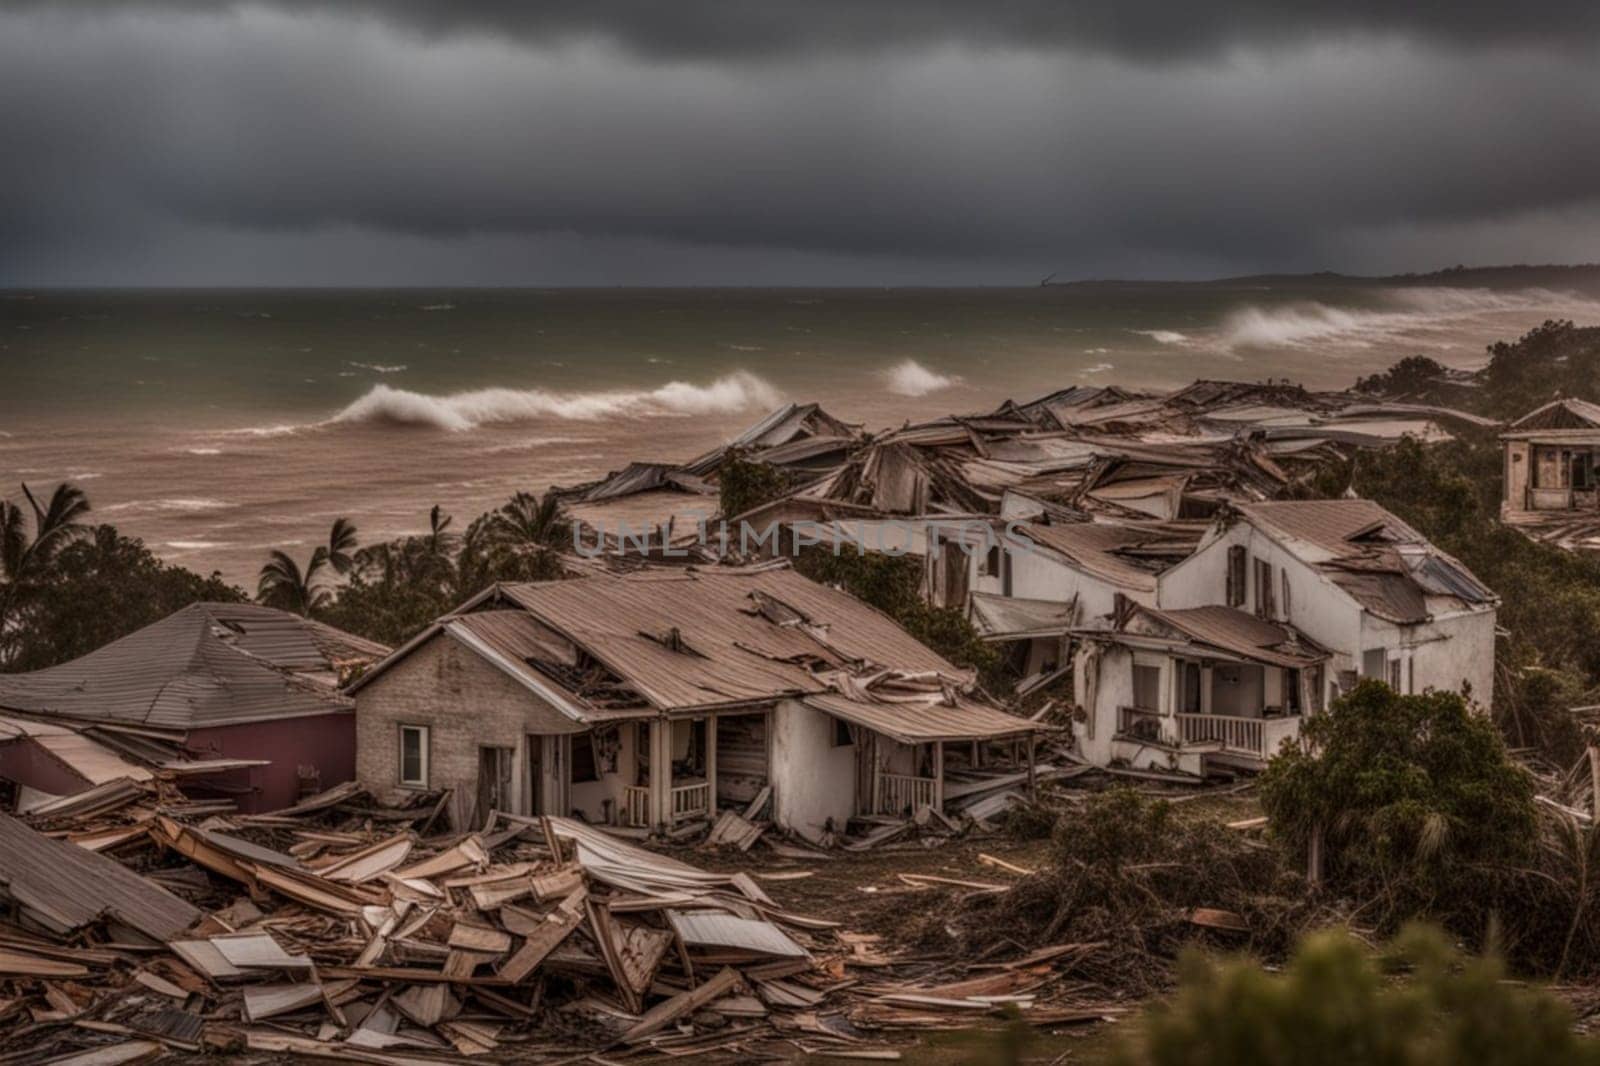 neighborhood and houses destroyed by tornado at sunset near the sea illustration by verbano